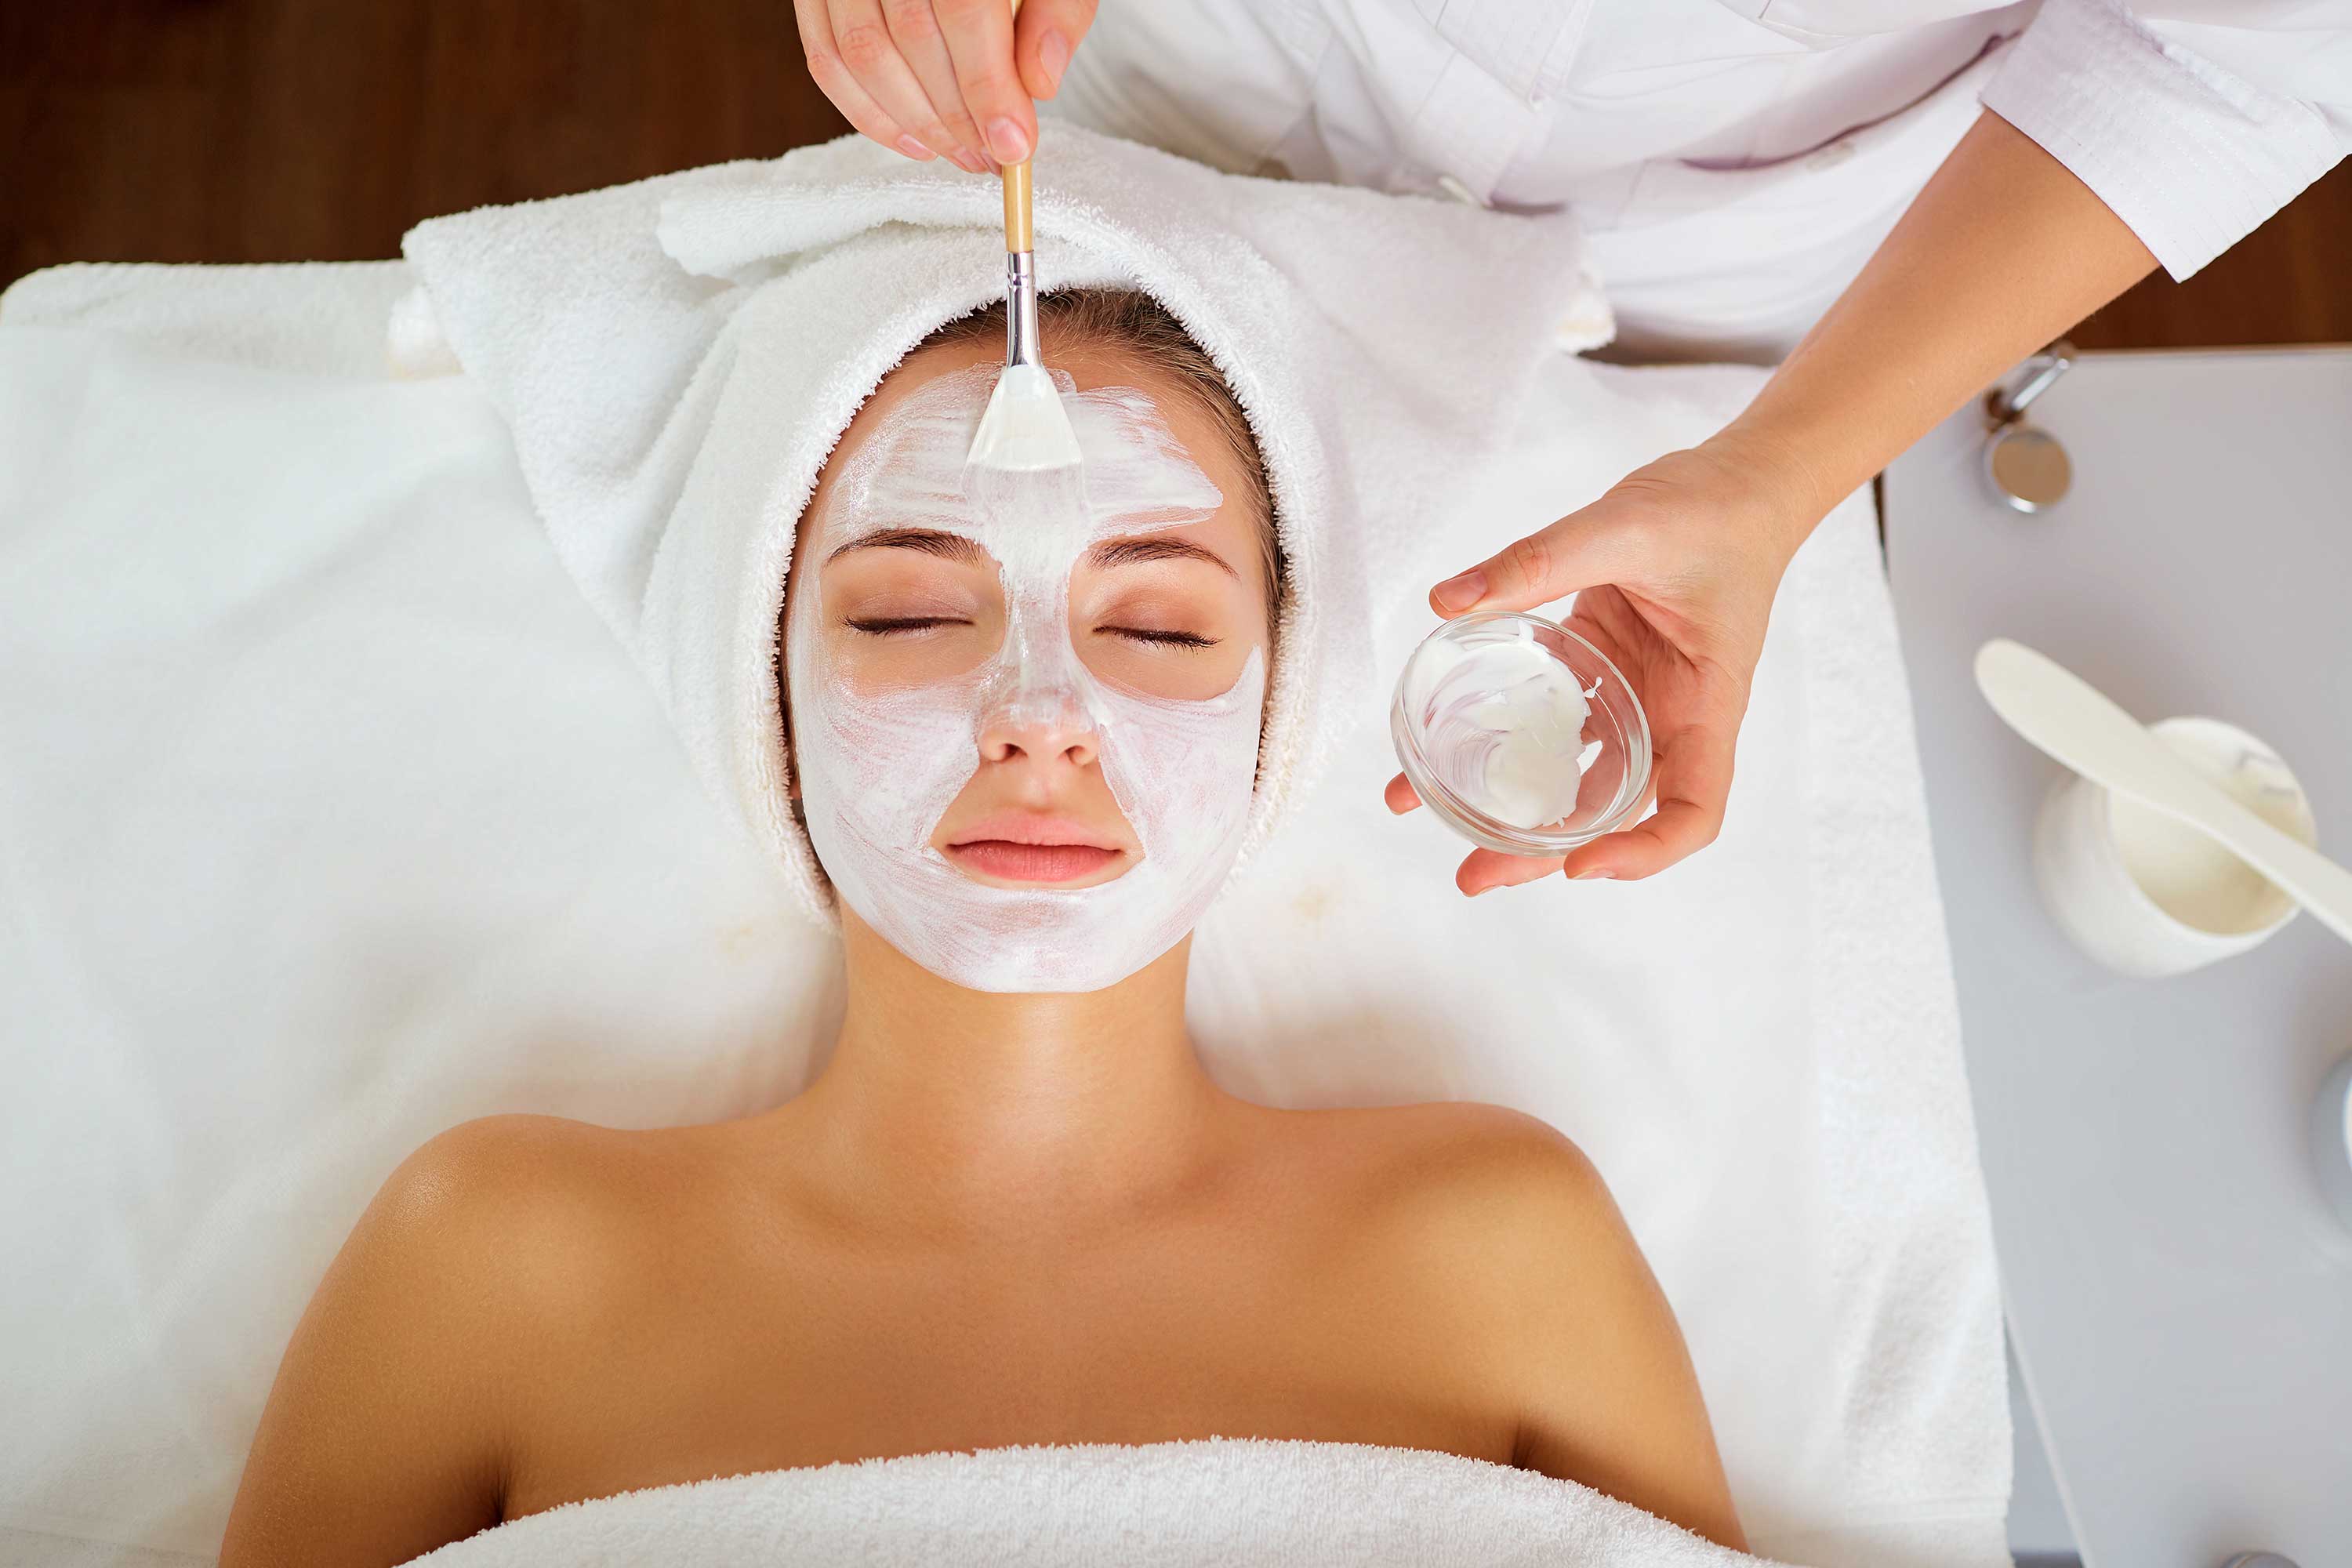 Facial Treatment Supplies & Products